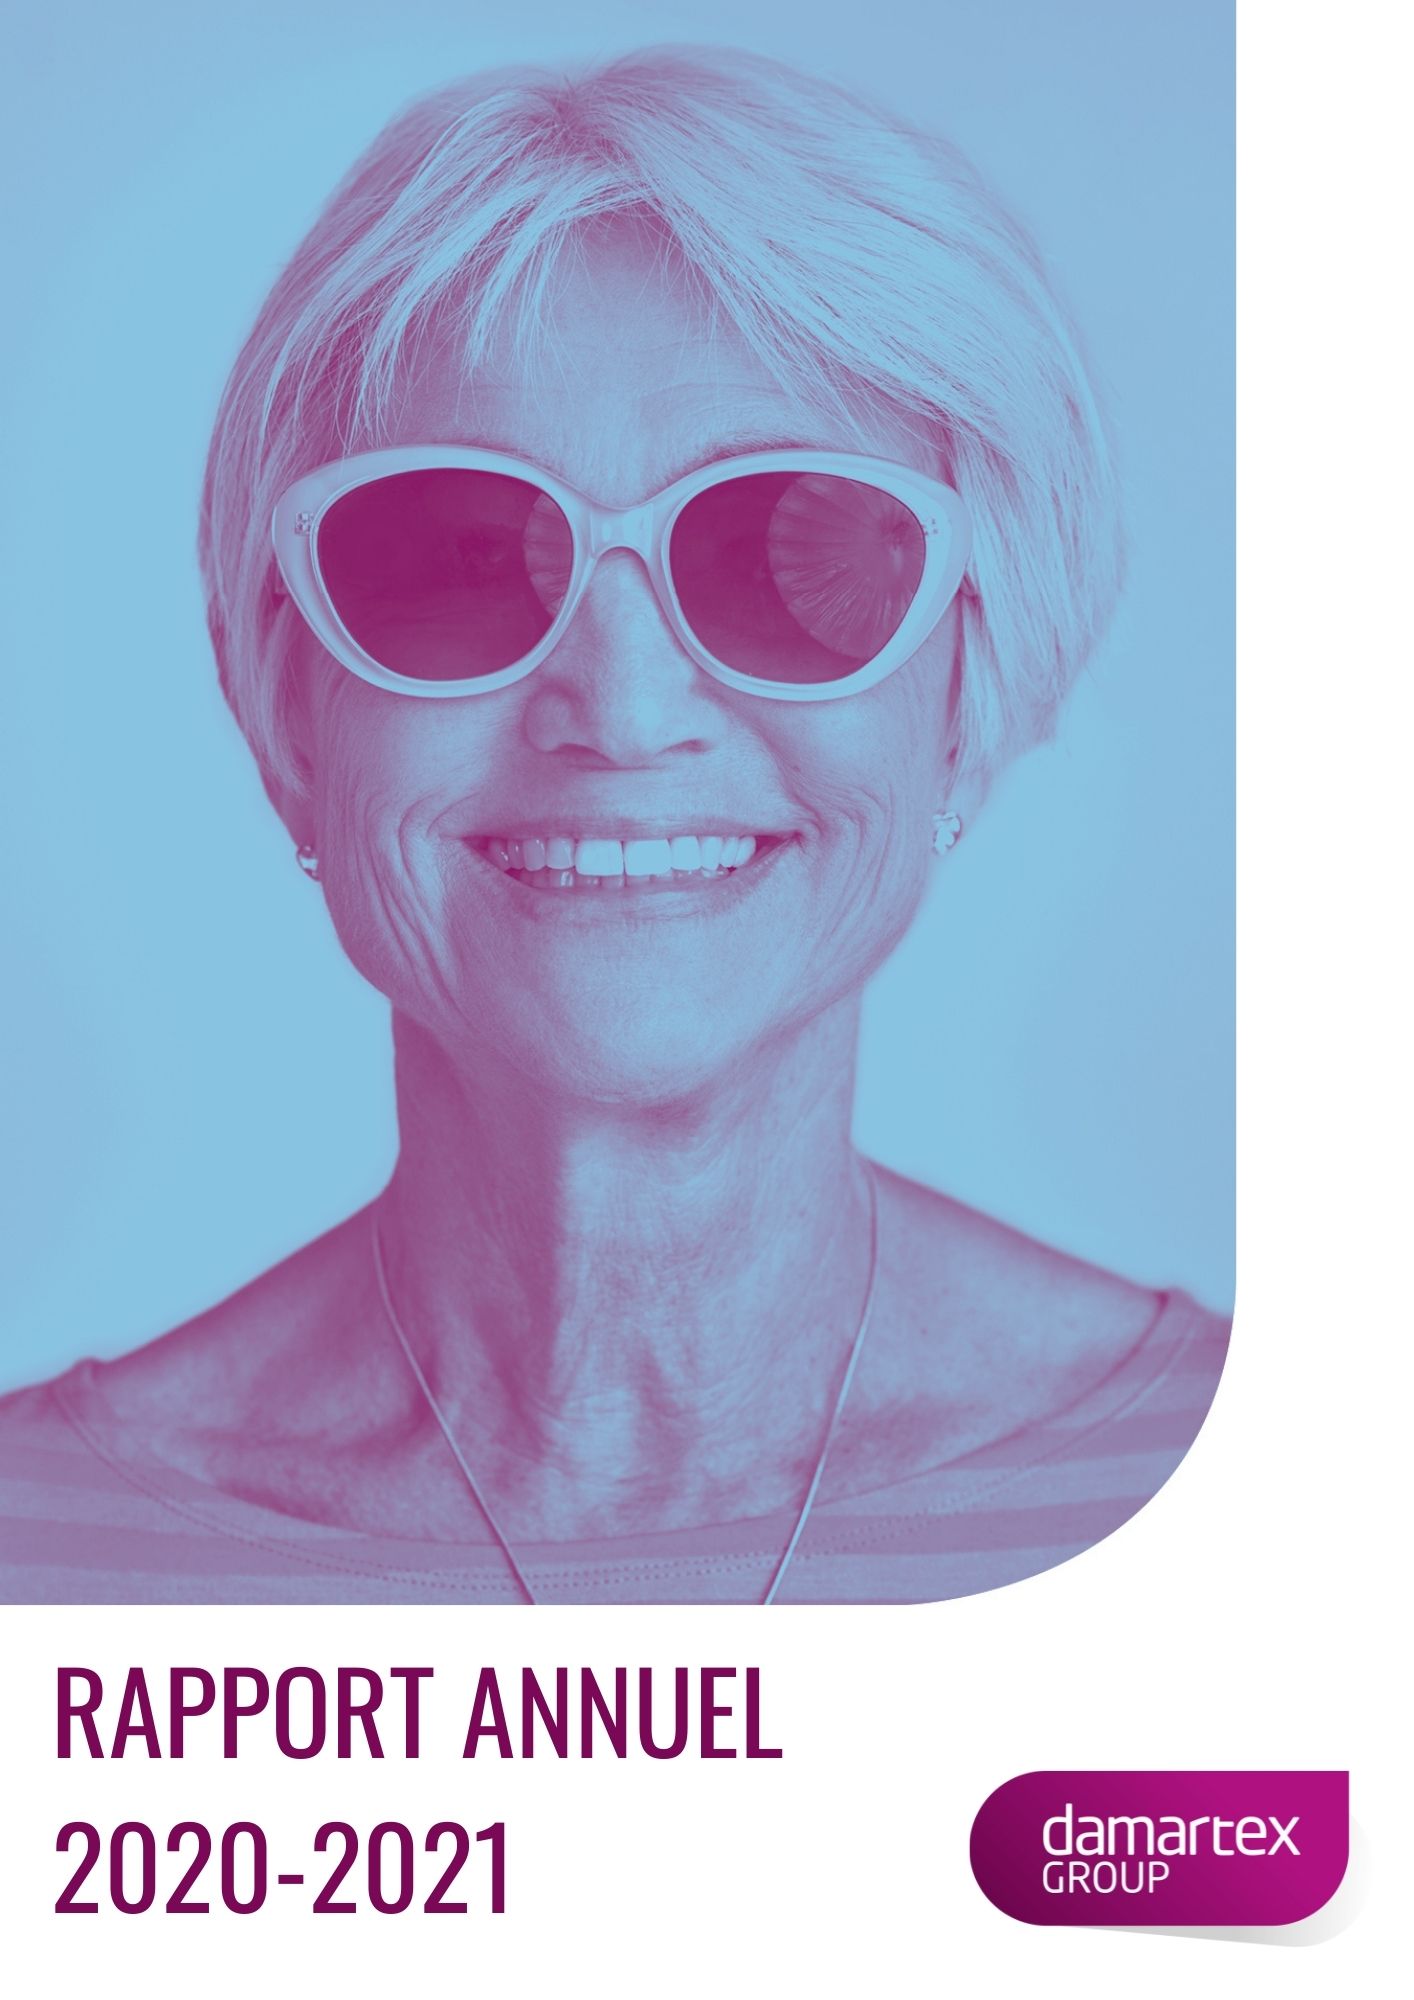 Rapport annuel 2020 - 2021